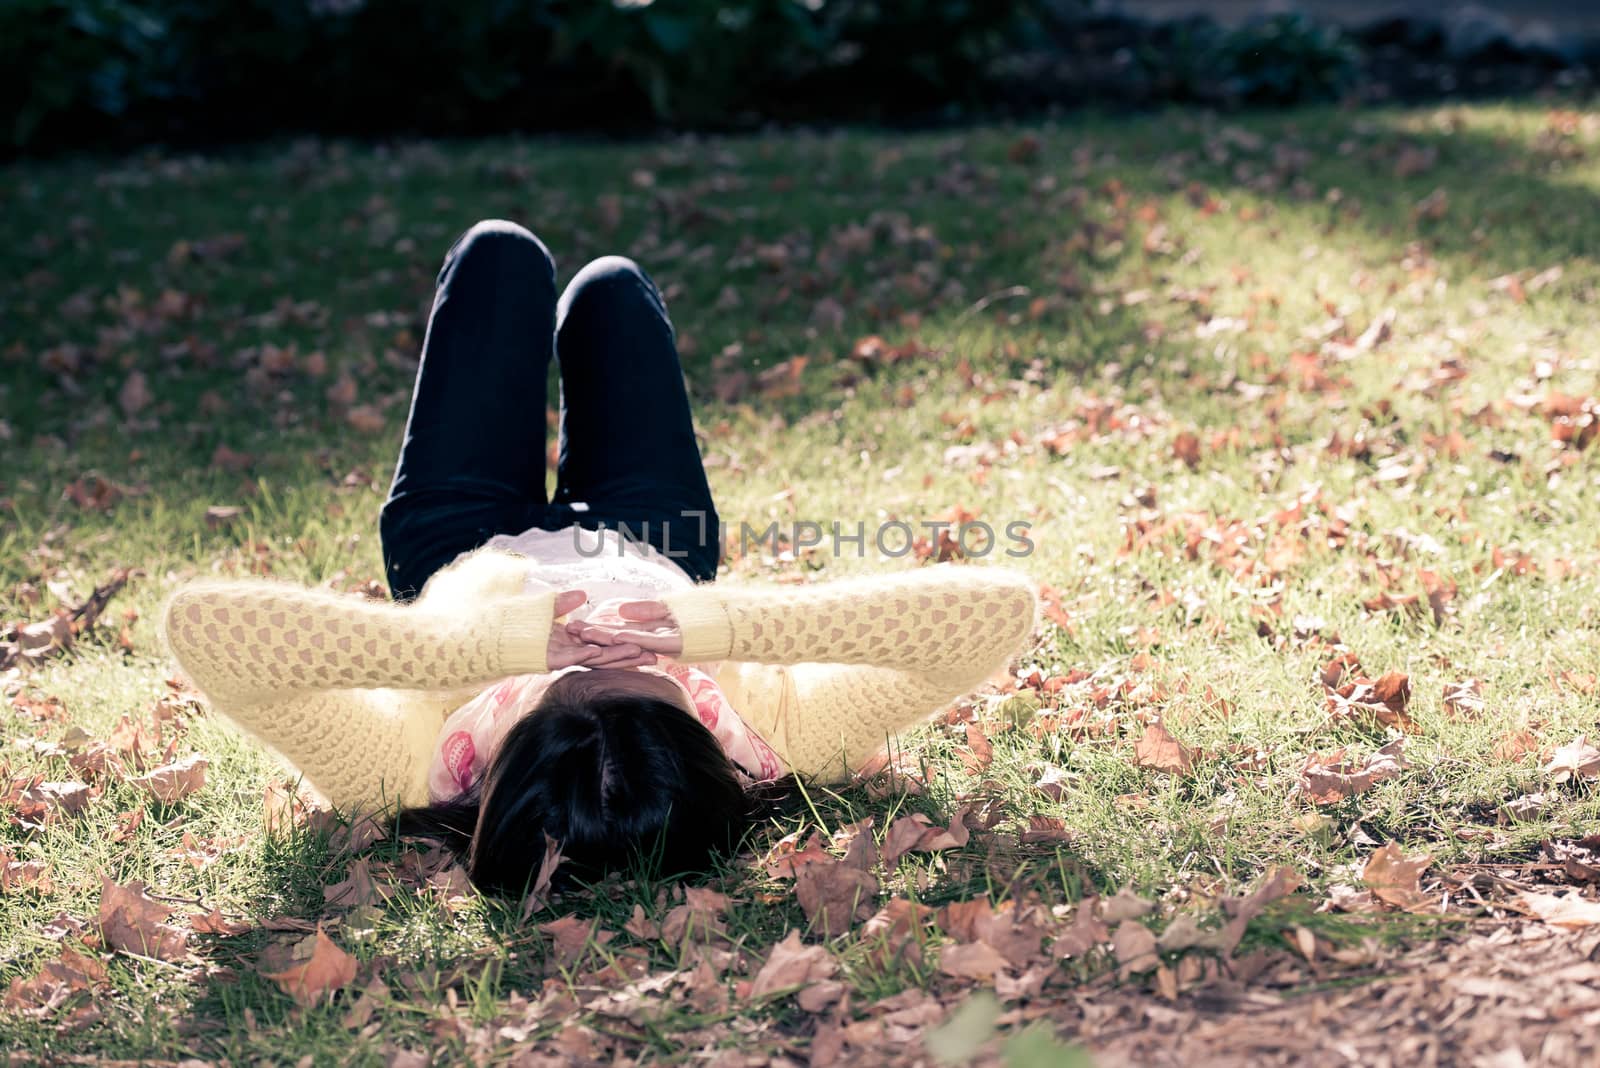 Unique top view of young woman laying in grass with a bunch of fallen leafs